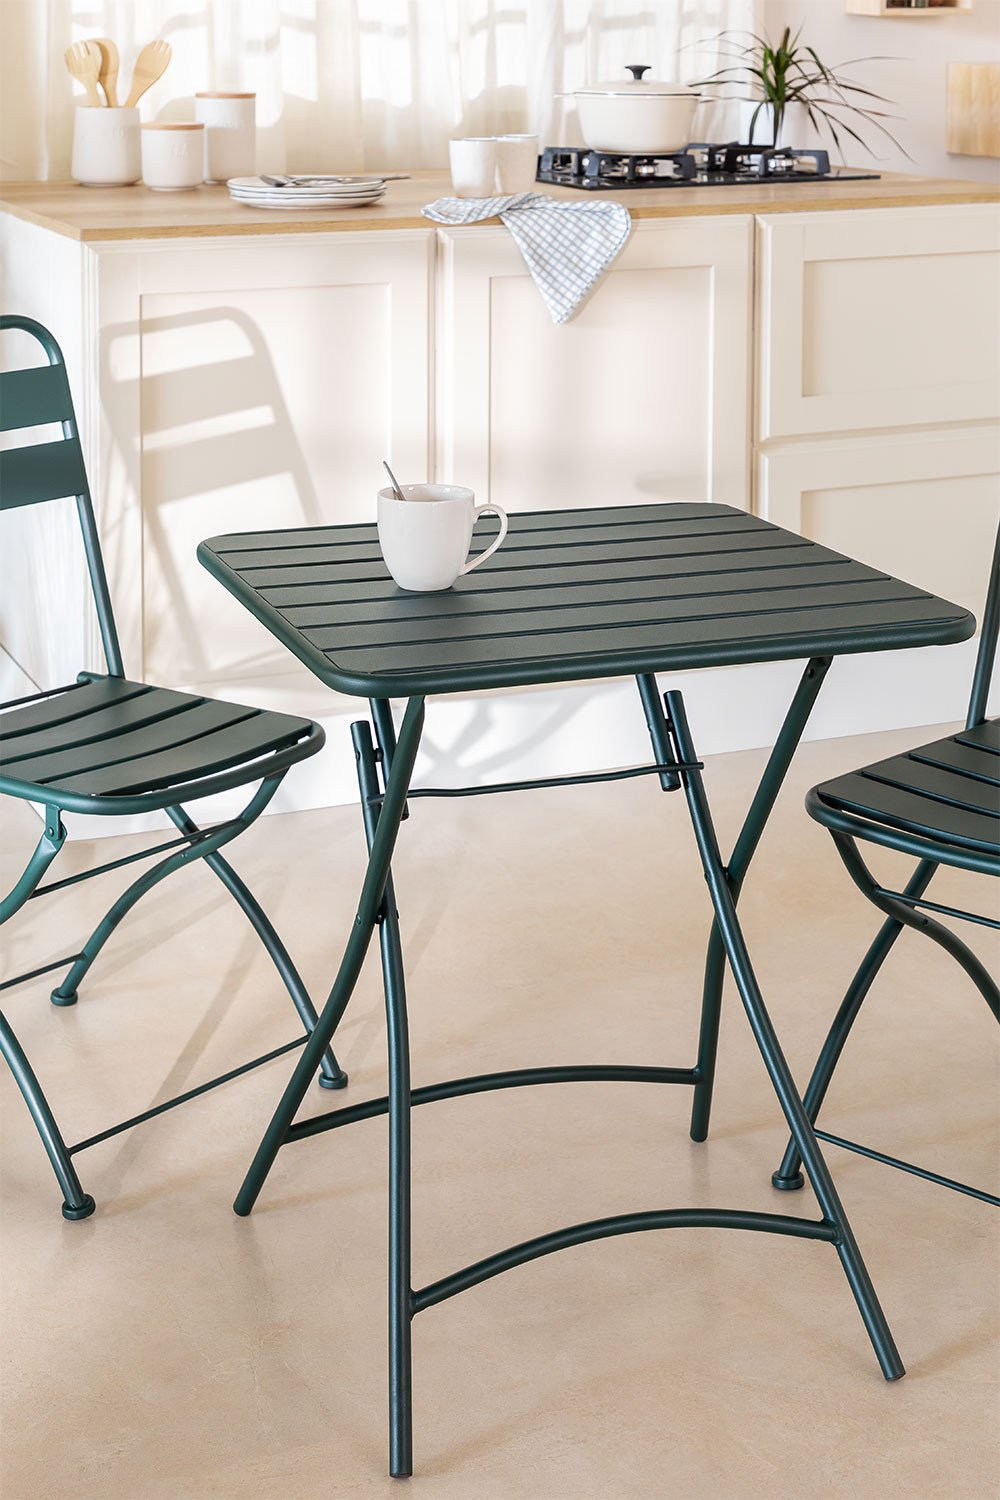 Foldable Steel Table (60 x 60 cm) Janti , gallery image 1